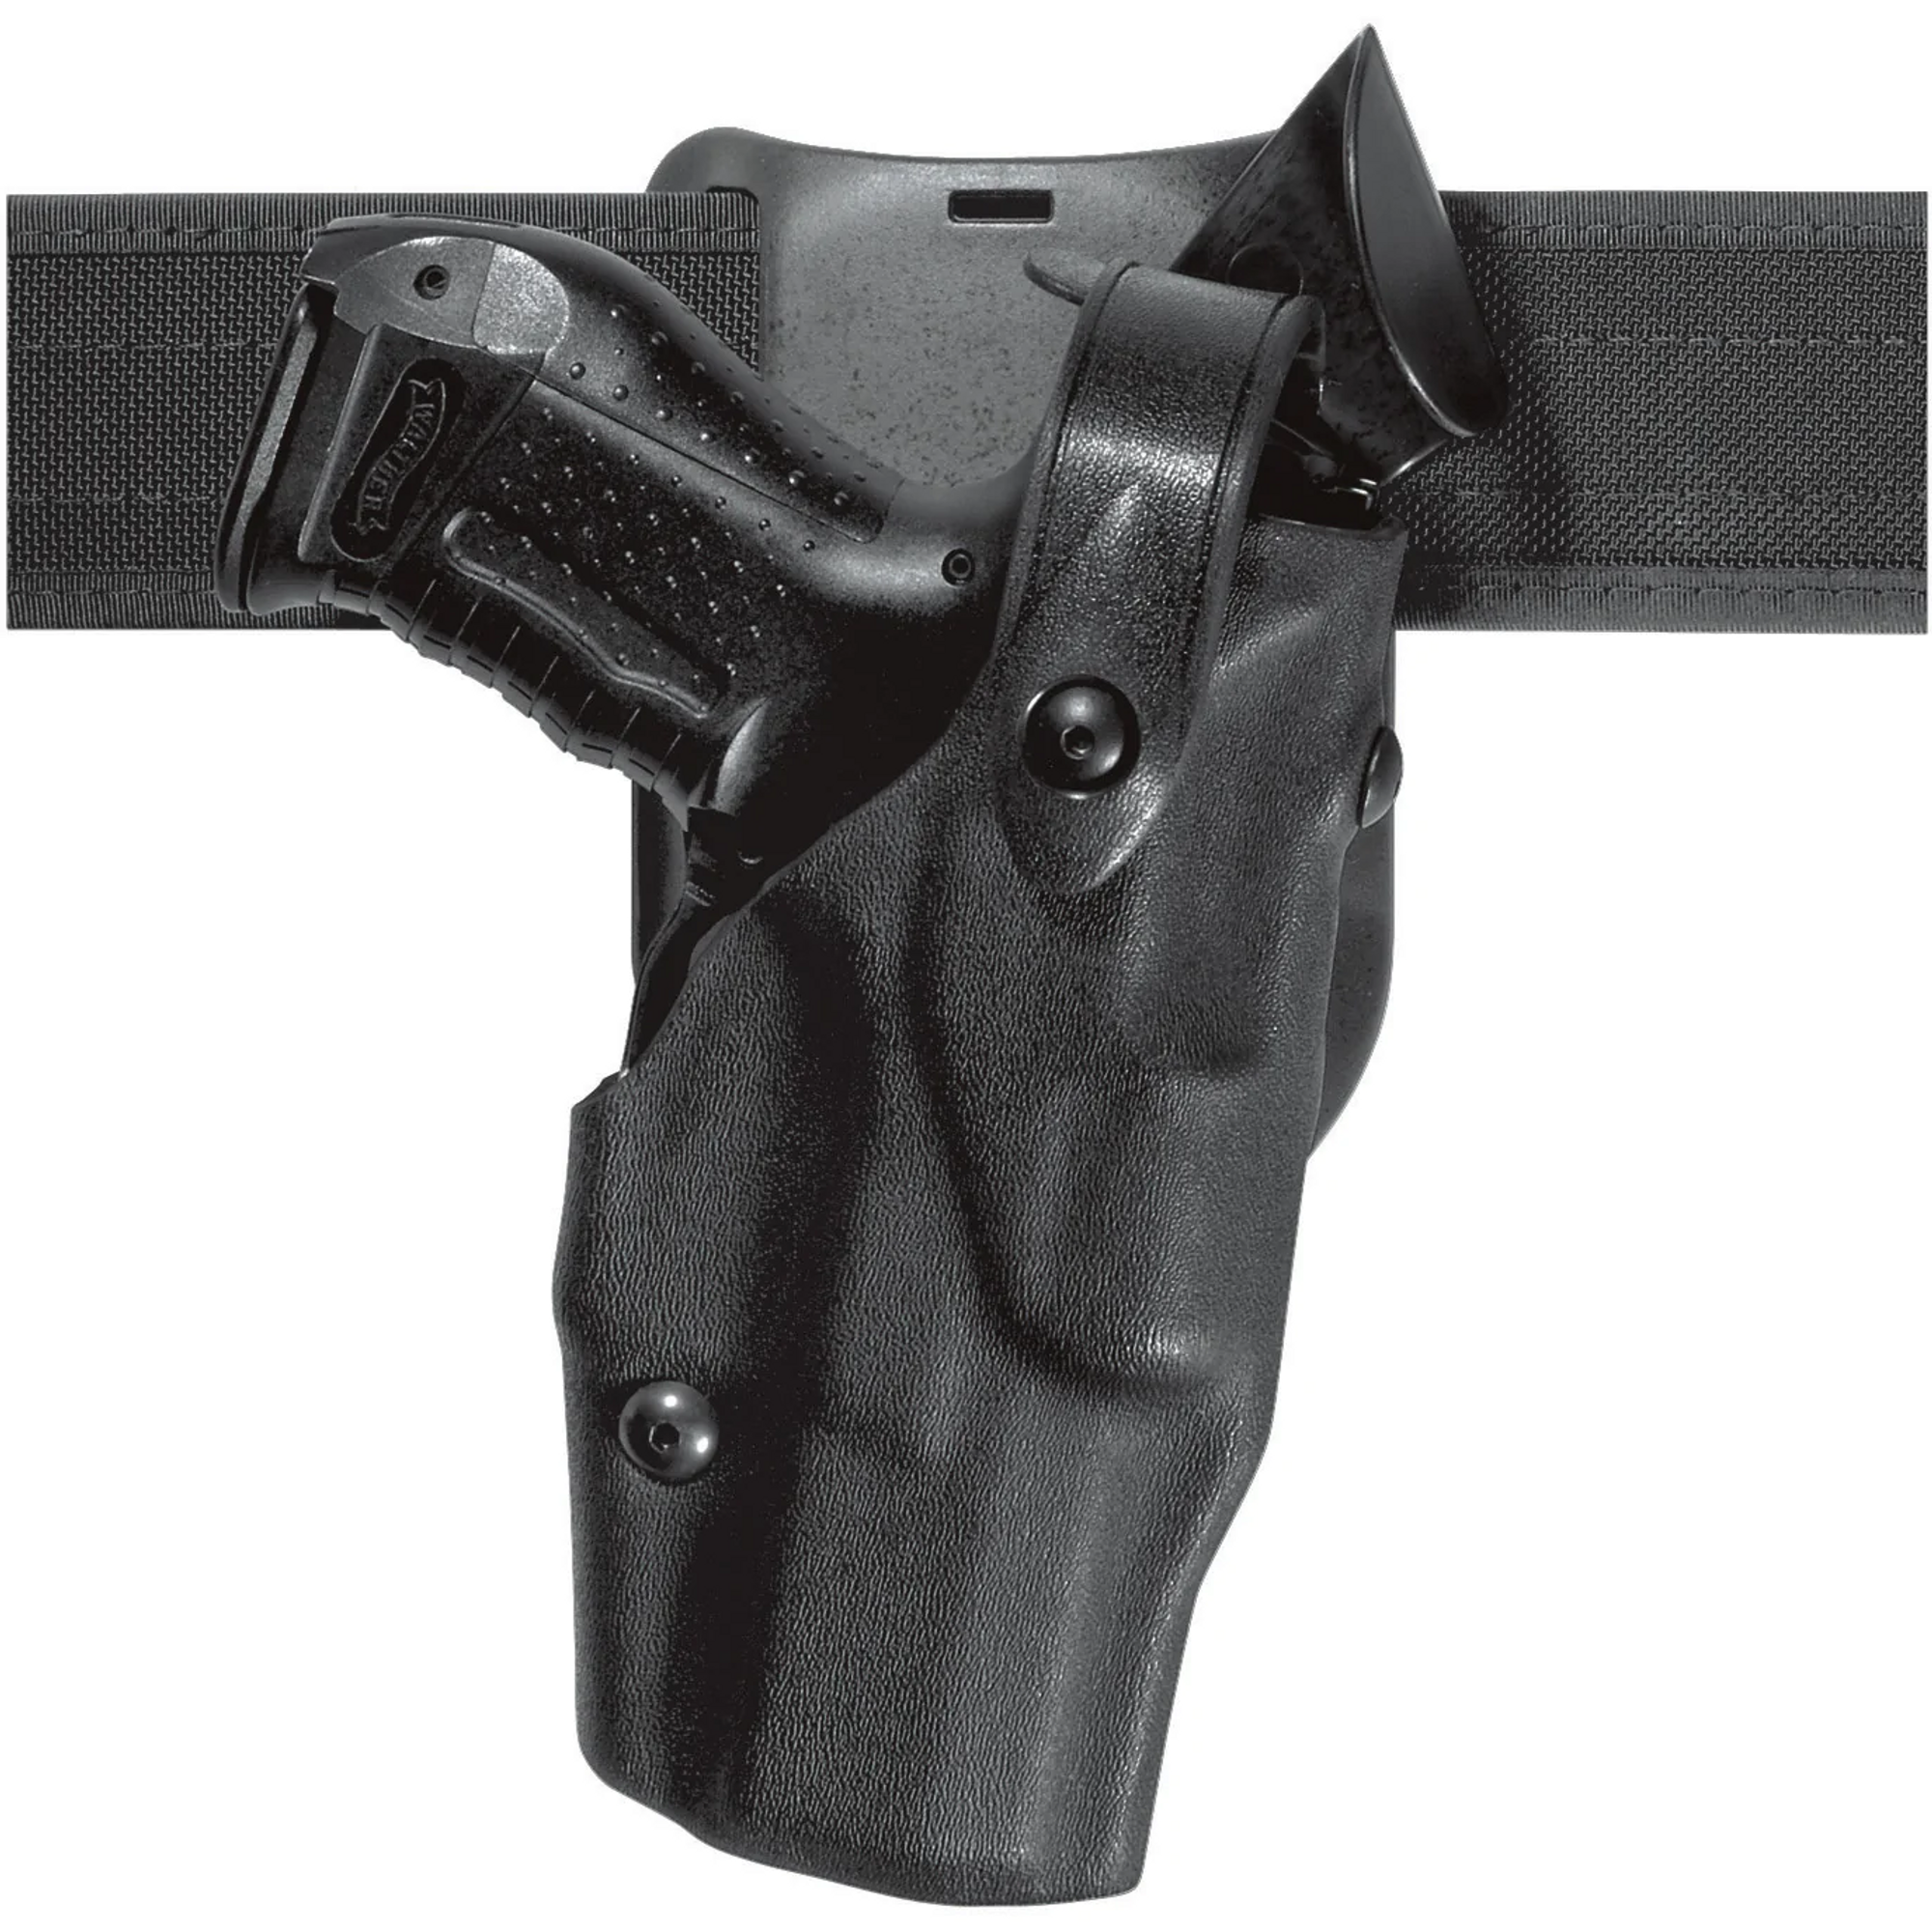 Model 6365 Als Low-ride, Level Iii Retention Duty Holster W/ Sls For Sig Sauer P250c W/ Light